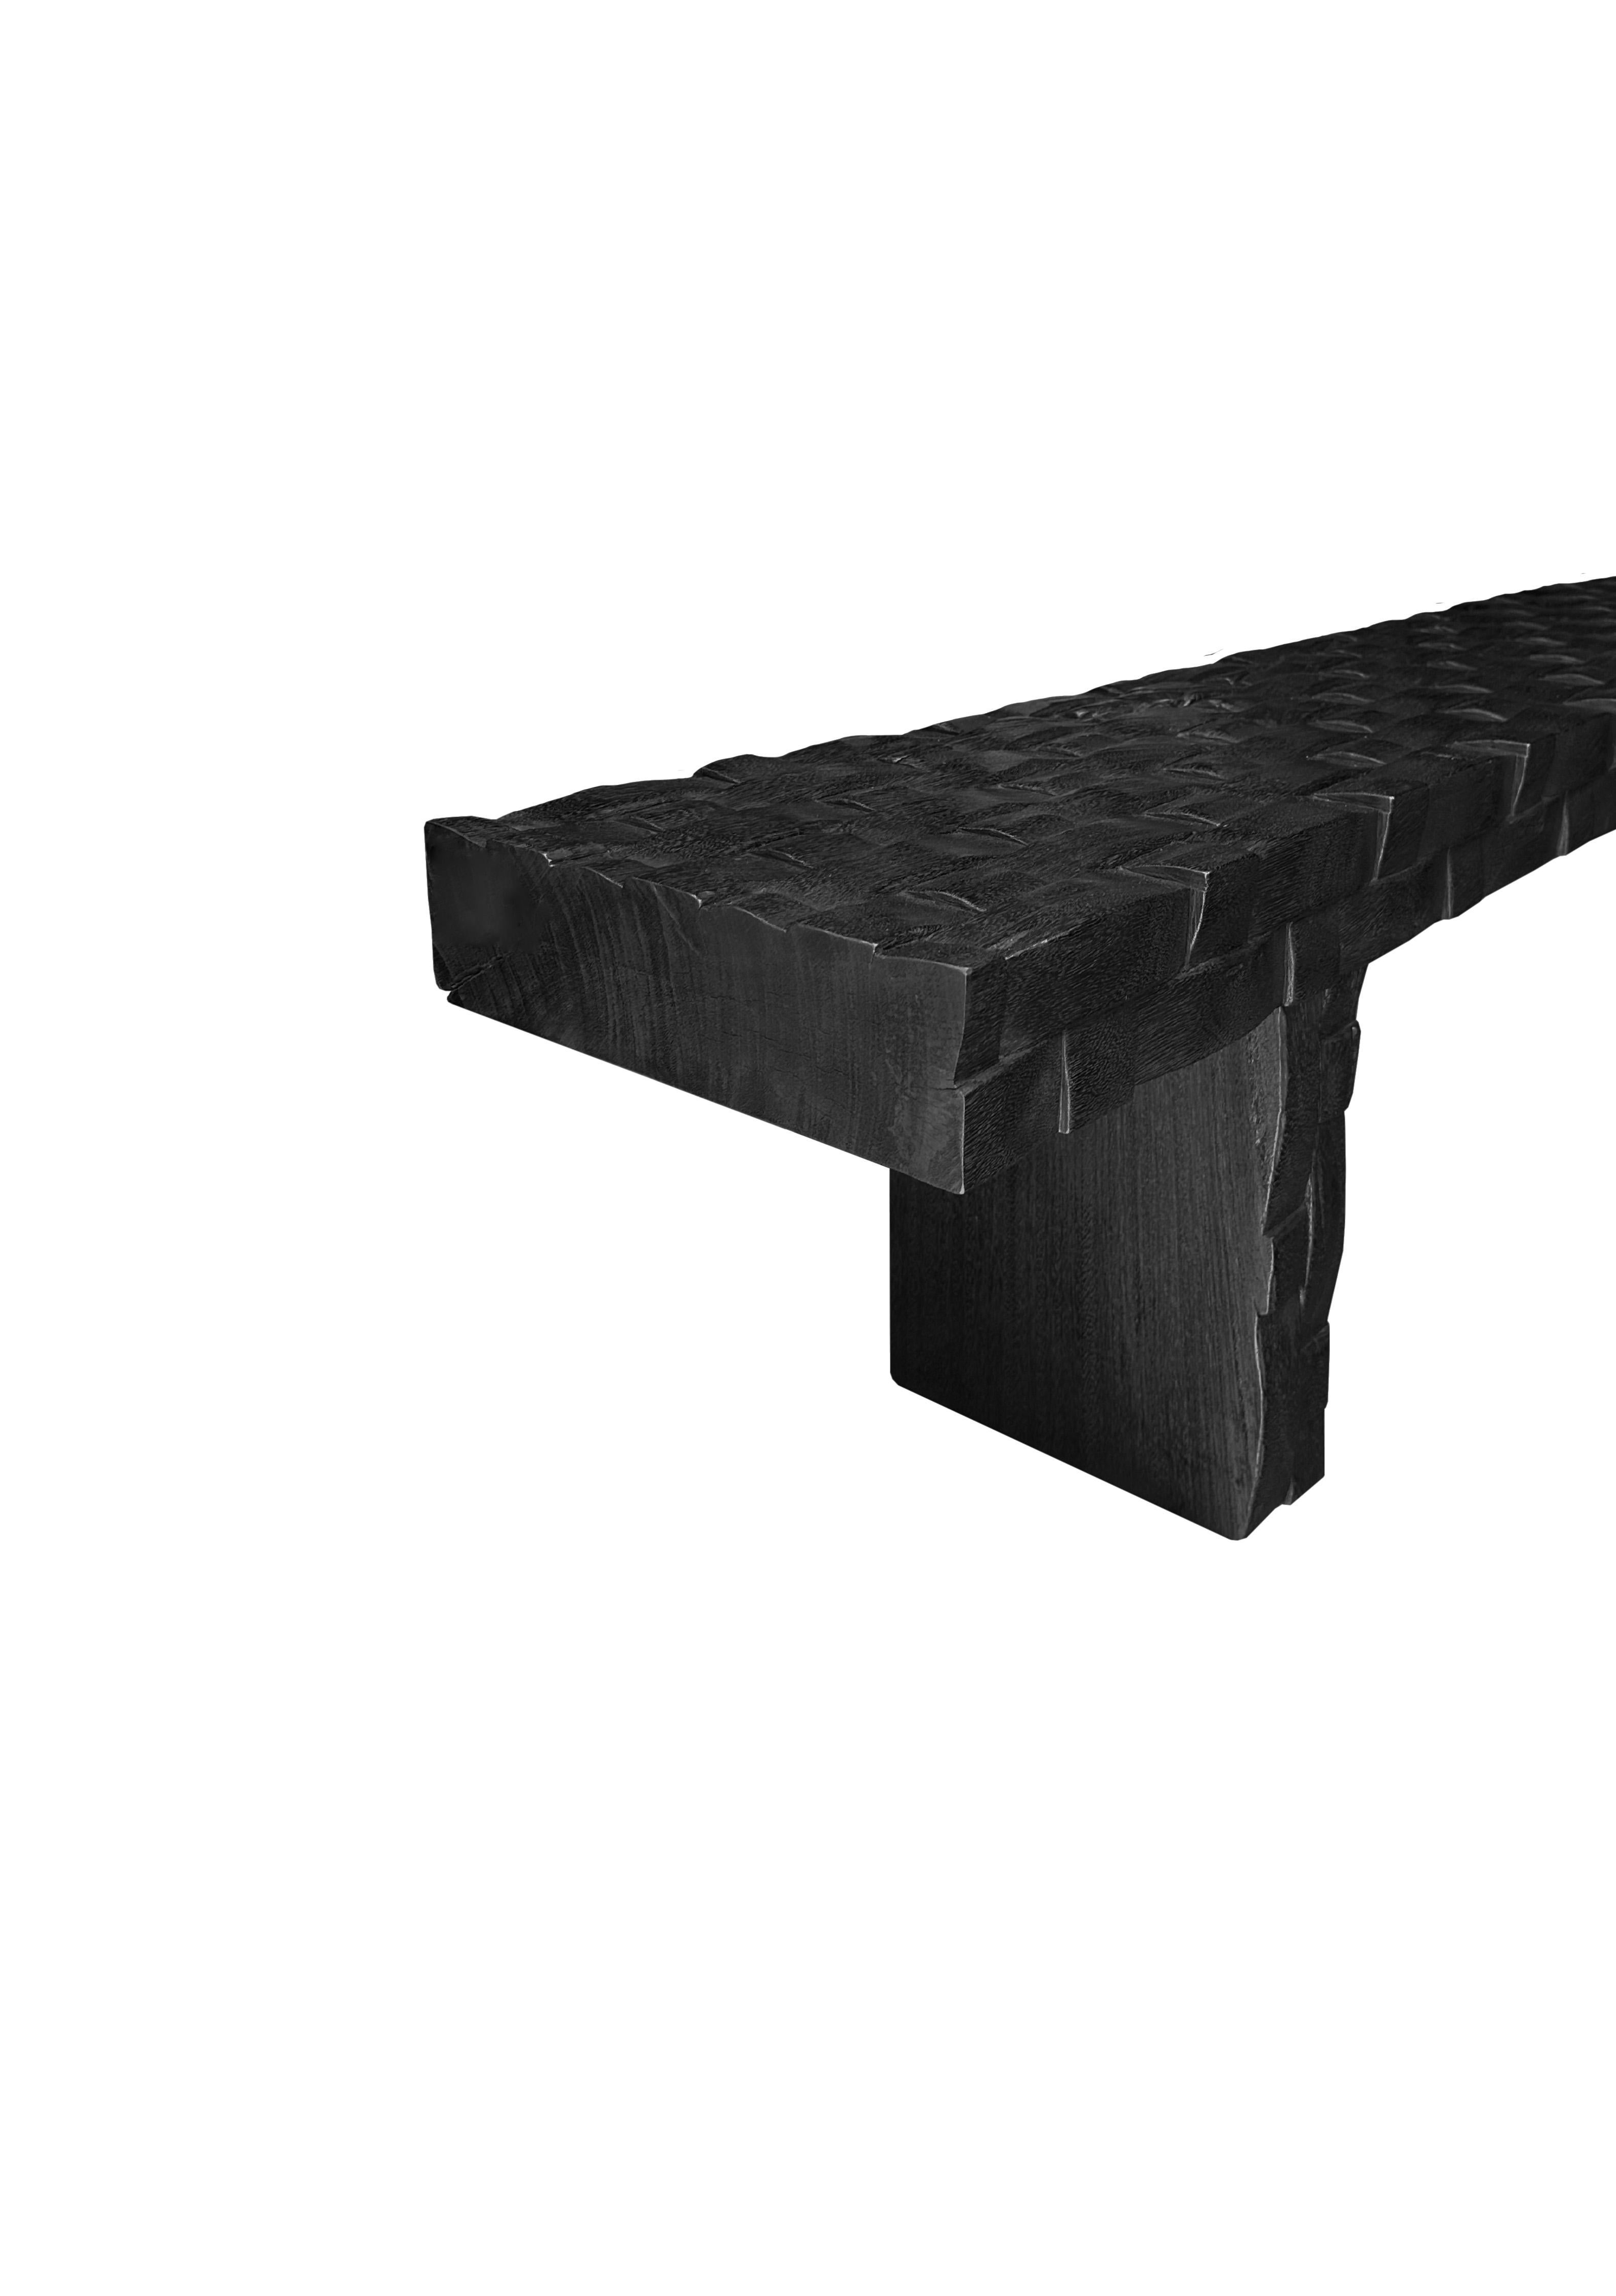 A sculptural hand-carved mango wood bench. To achieve is rich black pigment the bench was burnt three times and then finished with a clear coat. The mix of curved and straight lines along with a myriad of textures make for a very elegant bench.